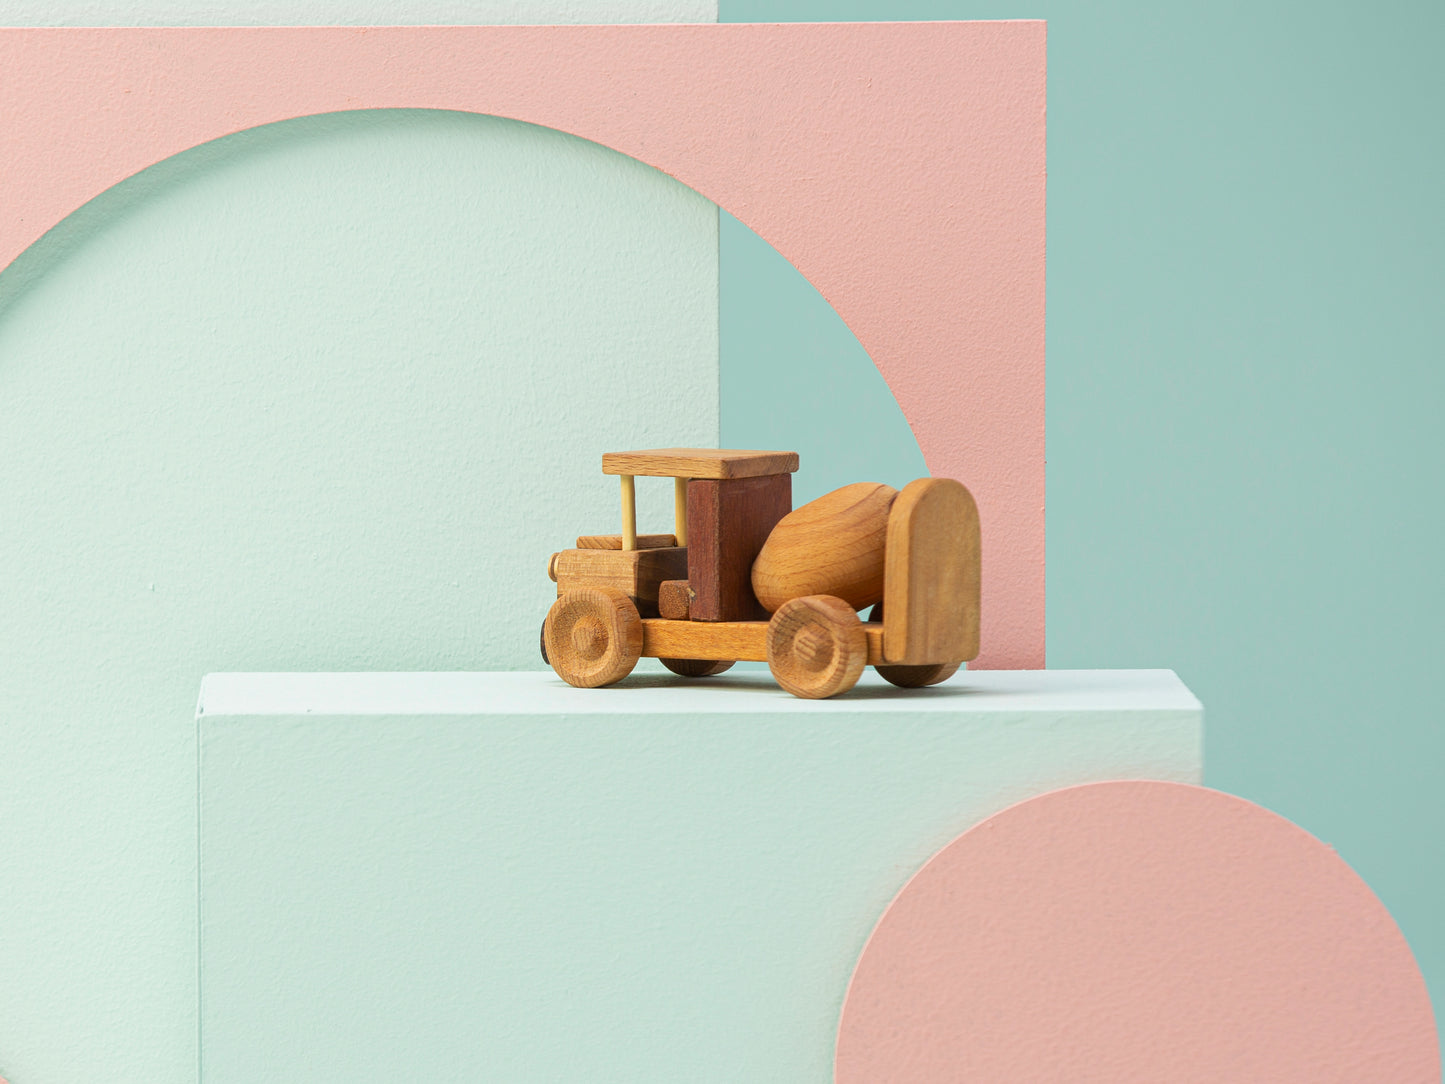 Wooden Toy Cement Mixer